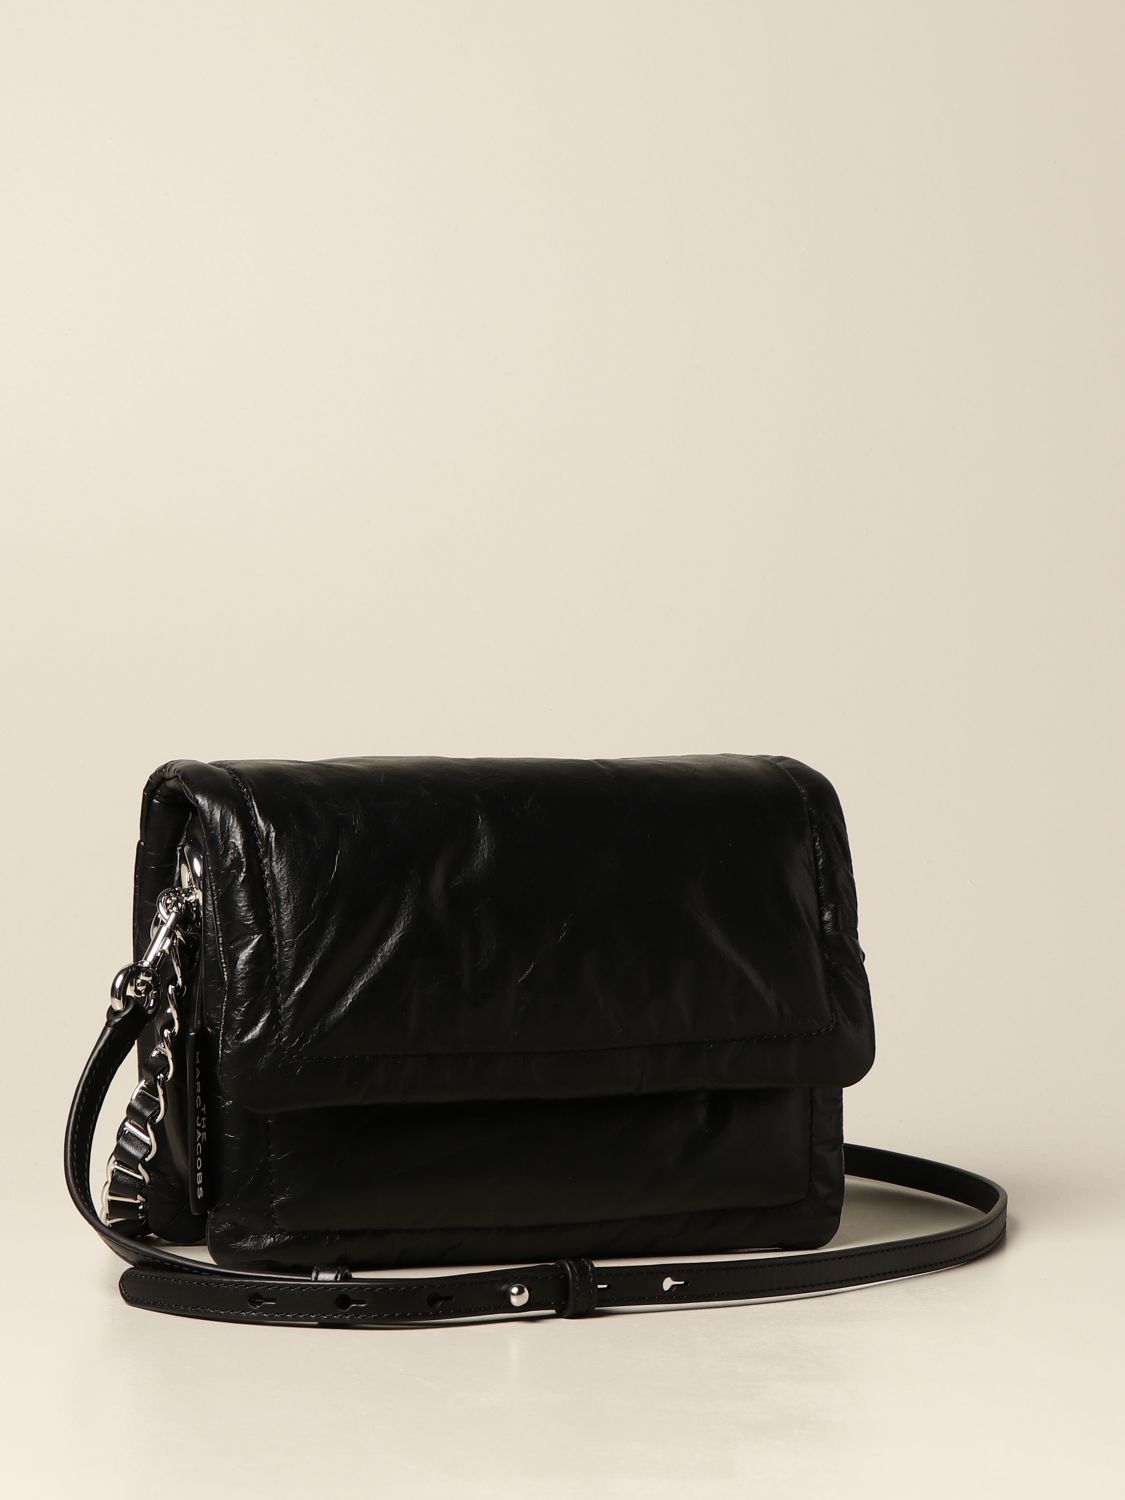 The Mini Pillow Marc Jacobs bag in ultralight leather